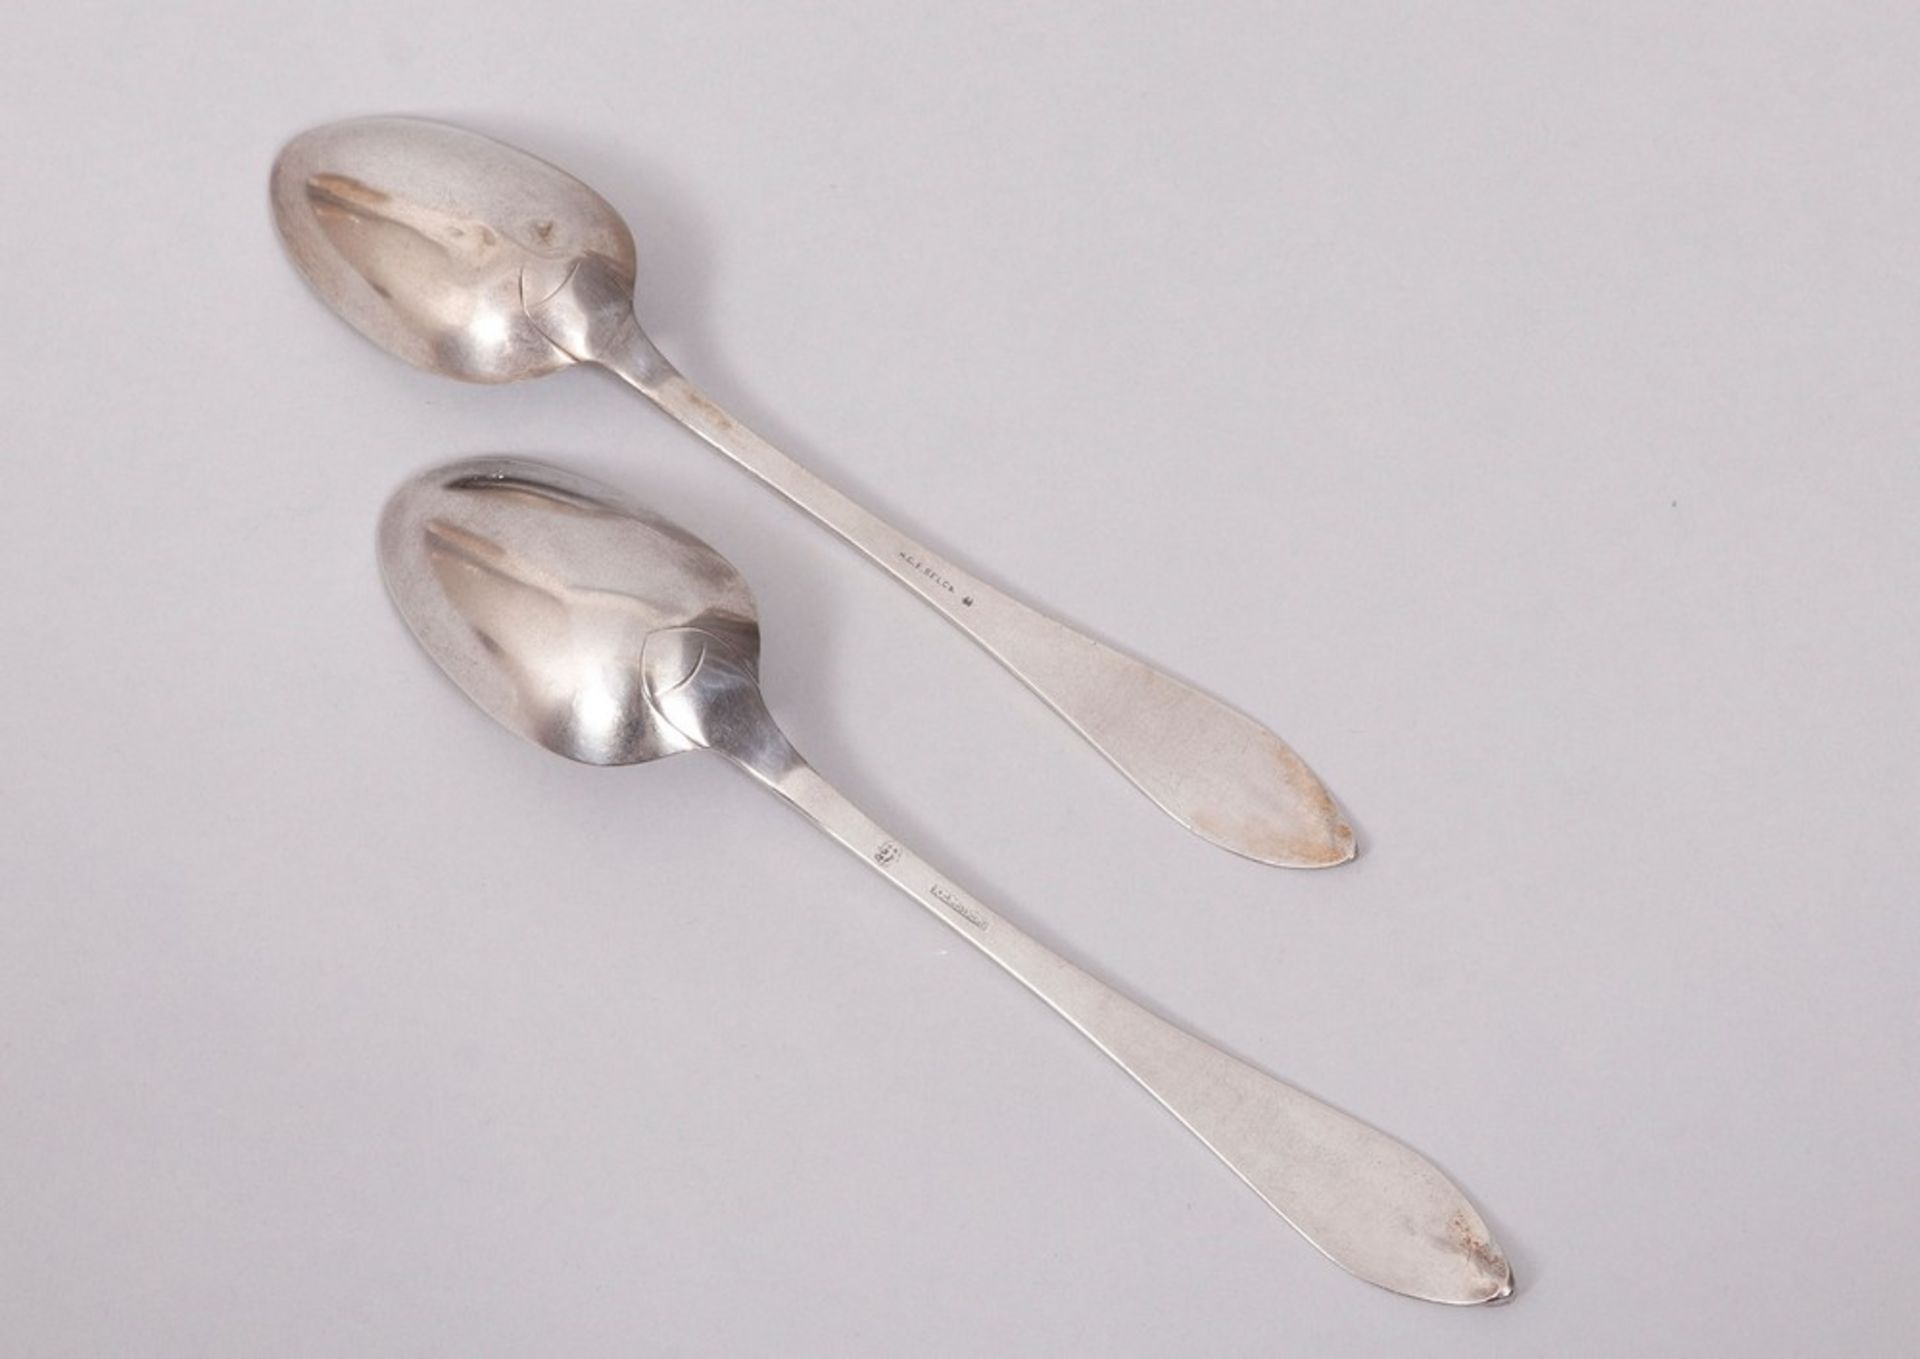 Pair of silver dining spoons, incl. Franz Peter Krumstroh, Glückstadt, early 19th C. - Image 2 of 4